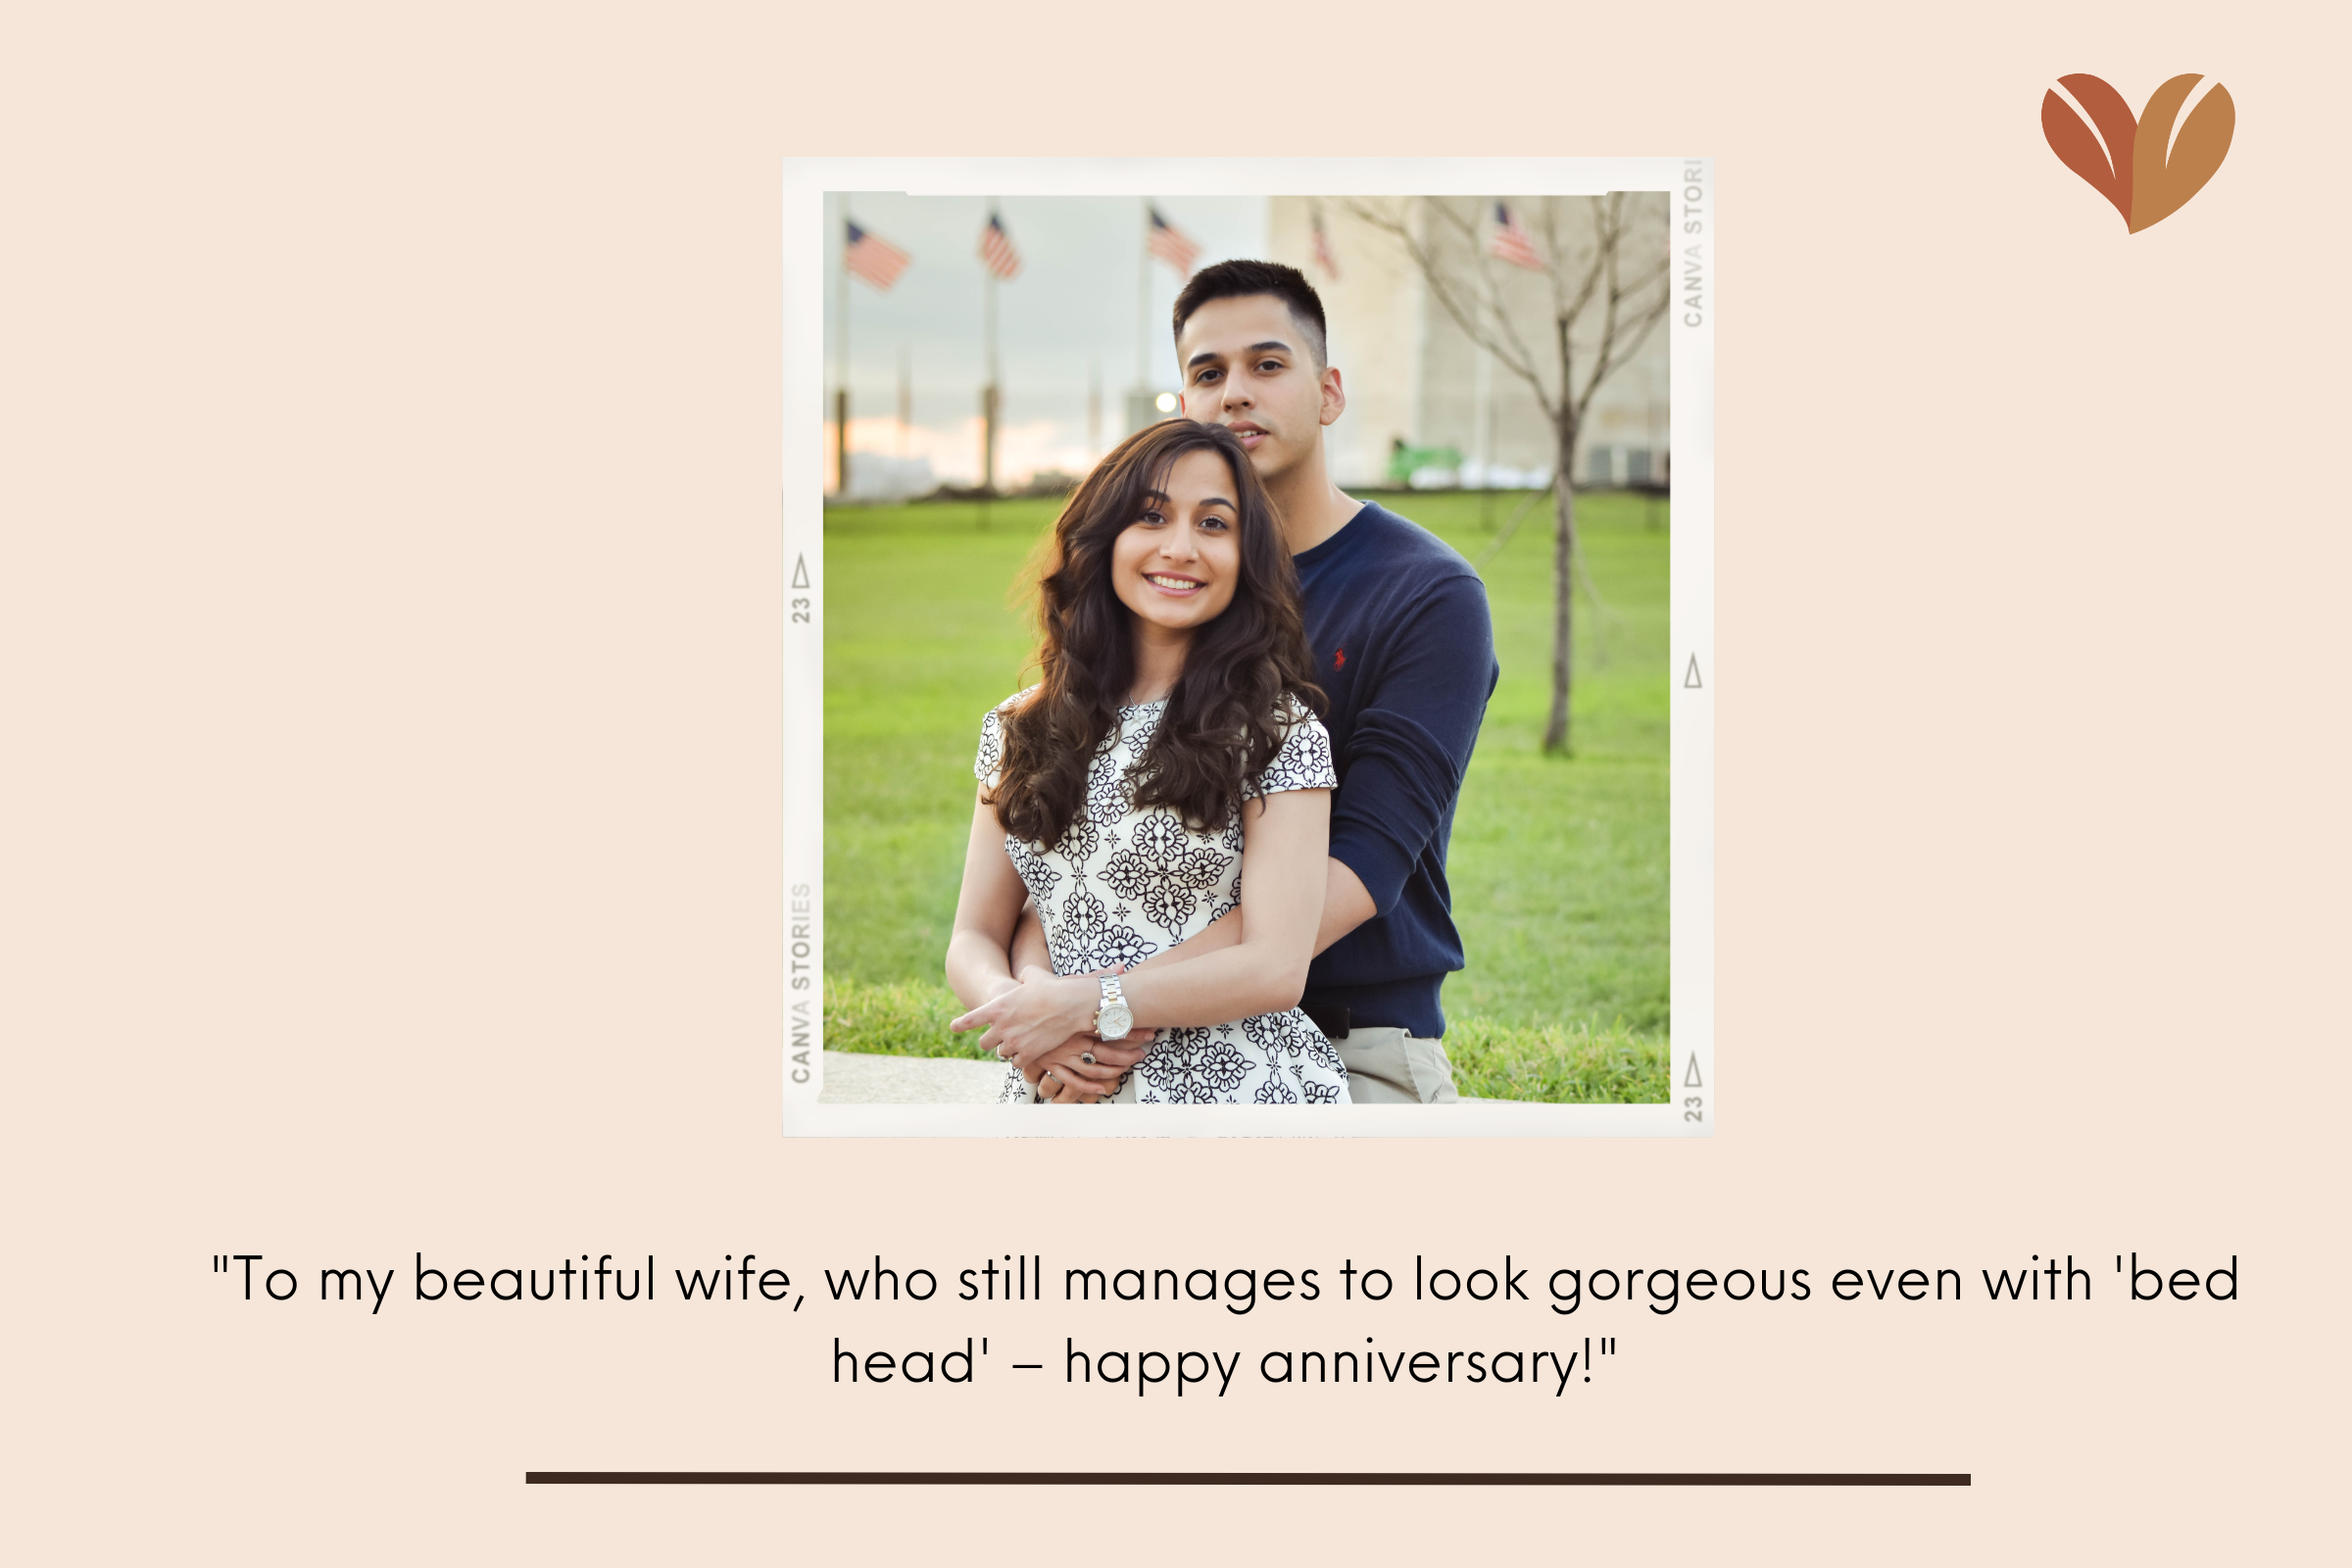 Best, funny Wedding Anniversary messages